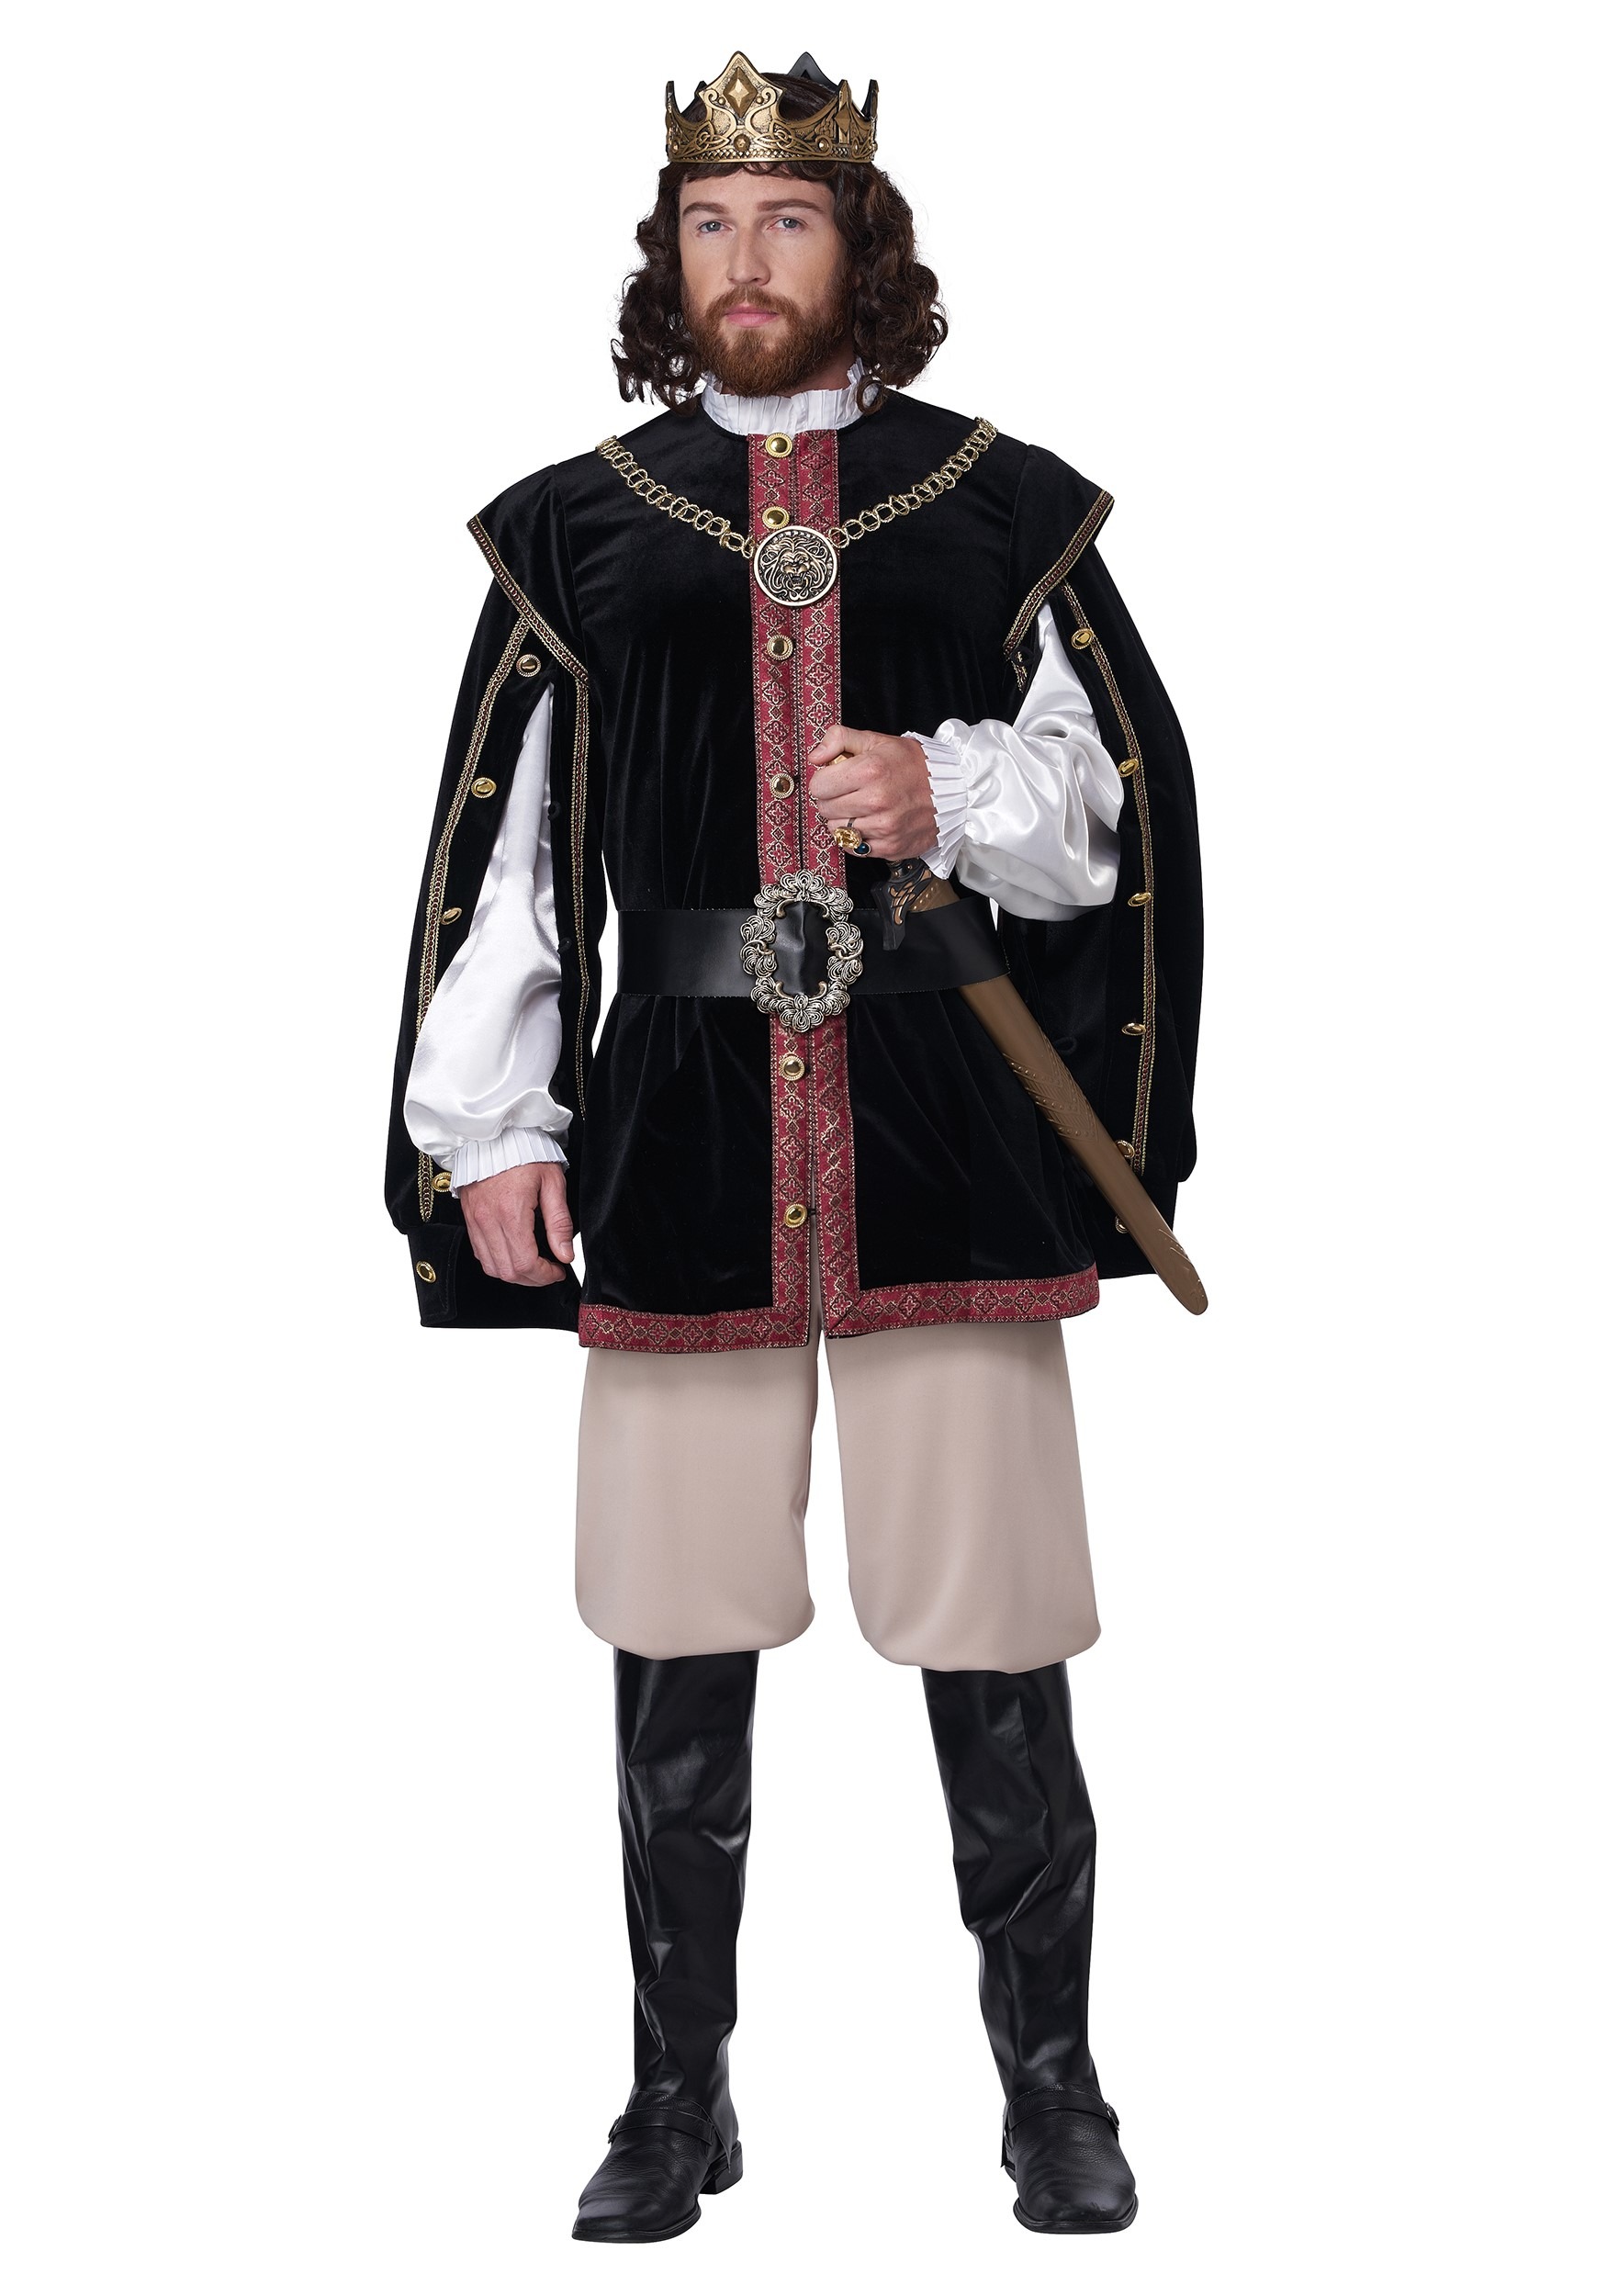 Photos - Fancy Dress California Costume Collection Men's King Costume Black/Brown/Red C 